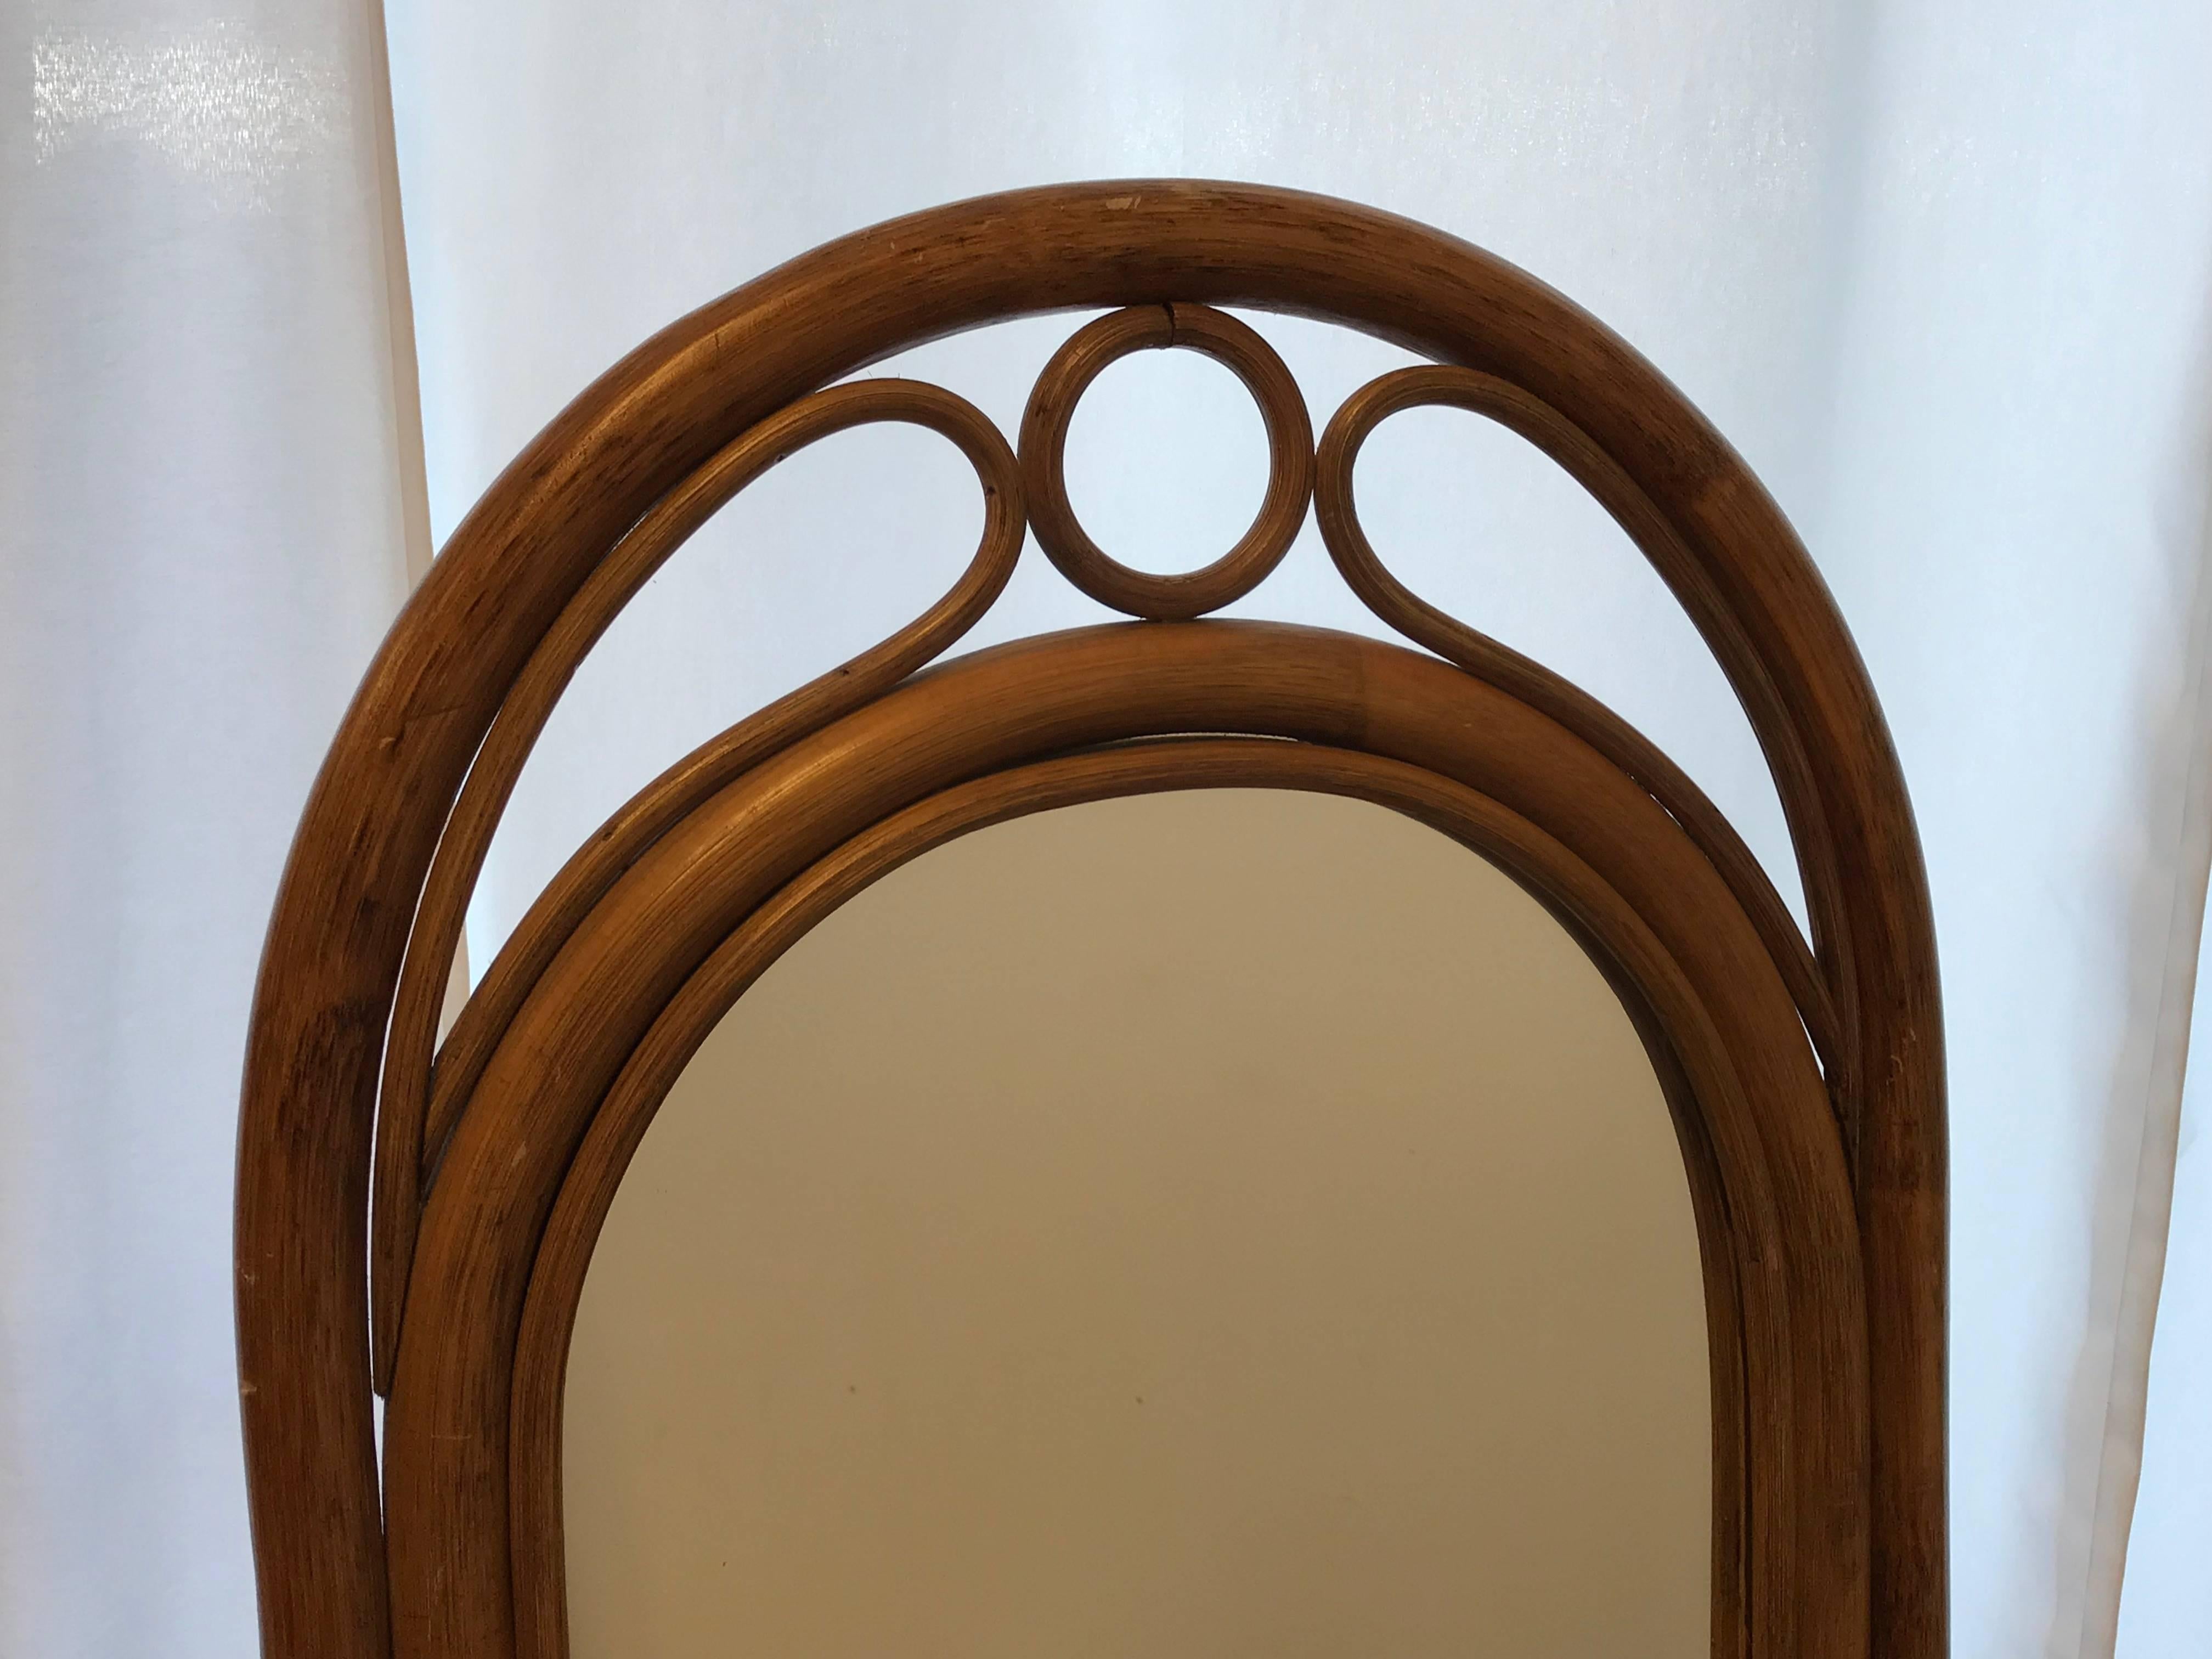 Offered is a fabulous, chinoiserie-chic 1970s bamboo and rattan floor mirror. Stand can fold up for mirror to lean against a wall.